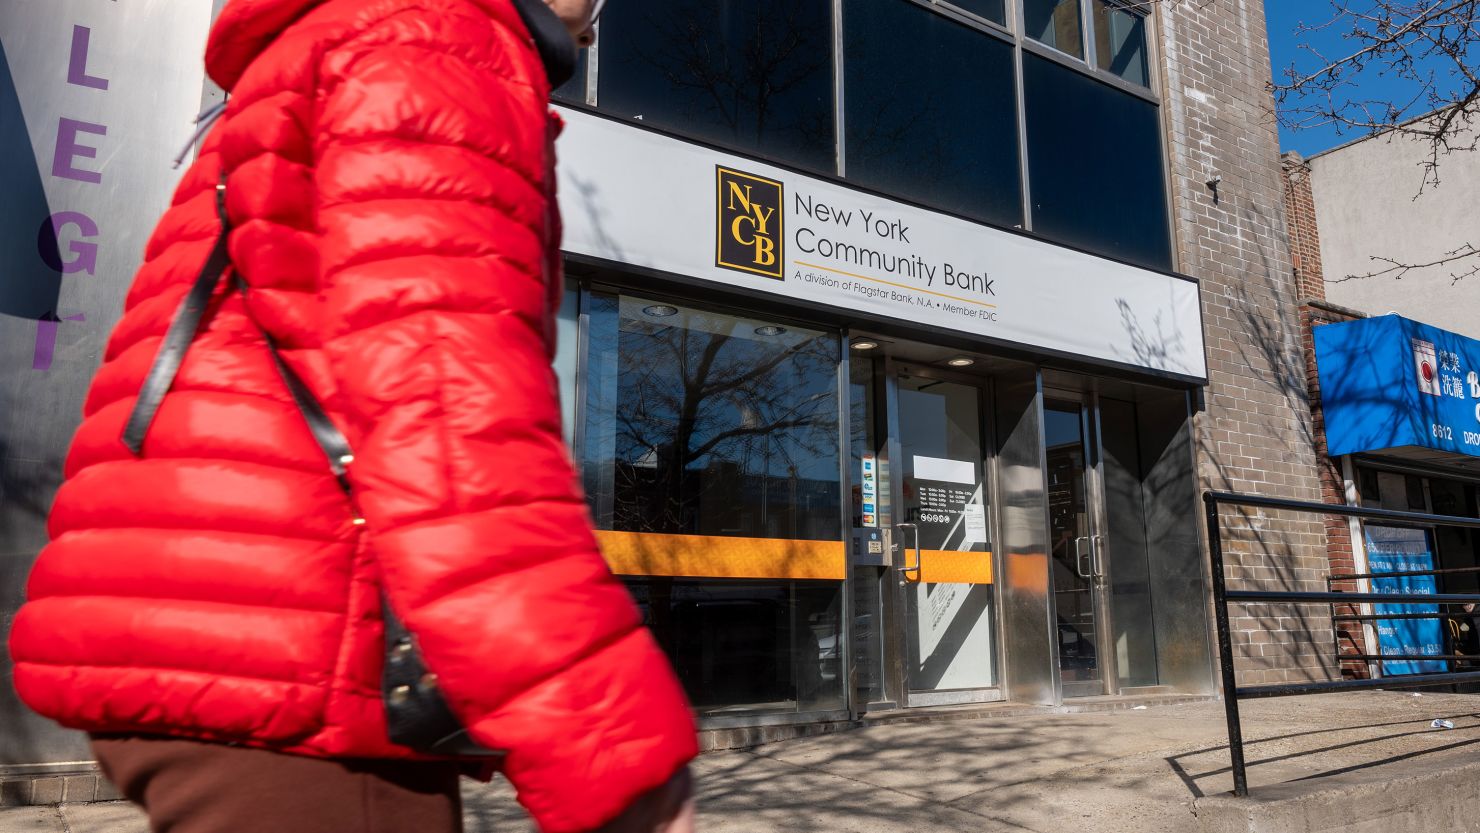 Shares of New York Community Bank plunged but ultimately closed higher on Wednesday.